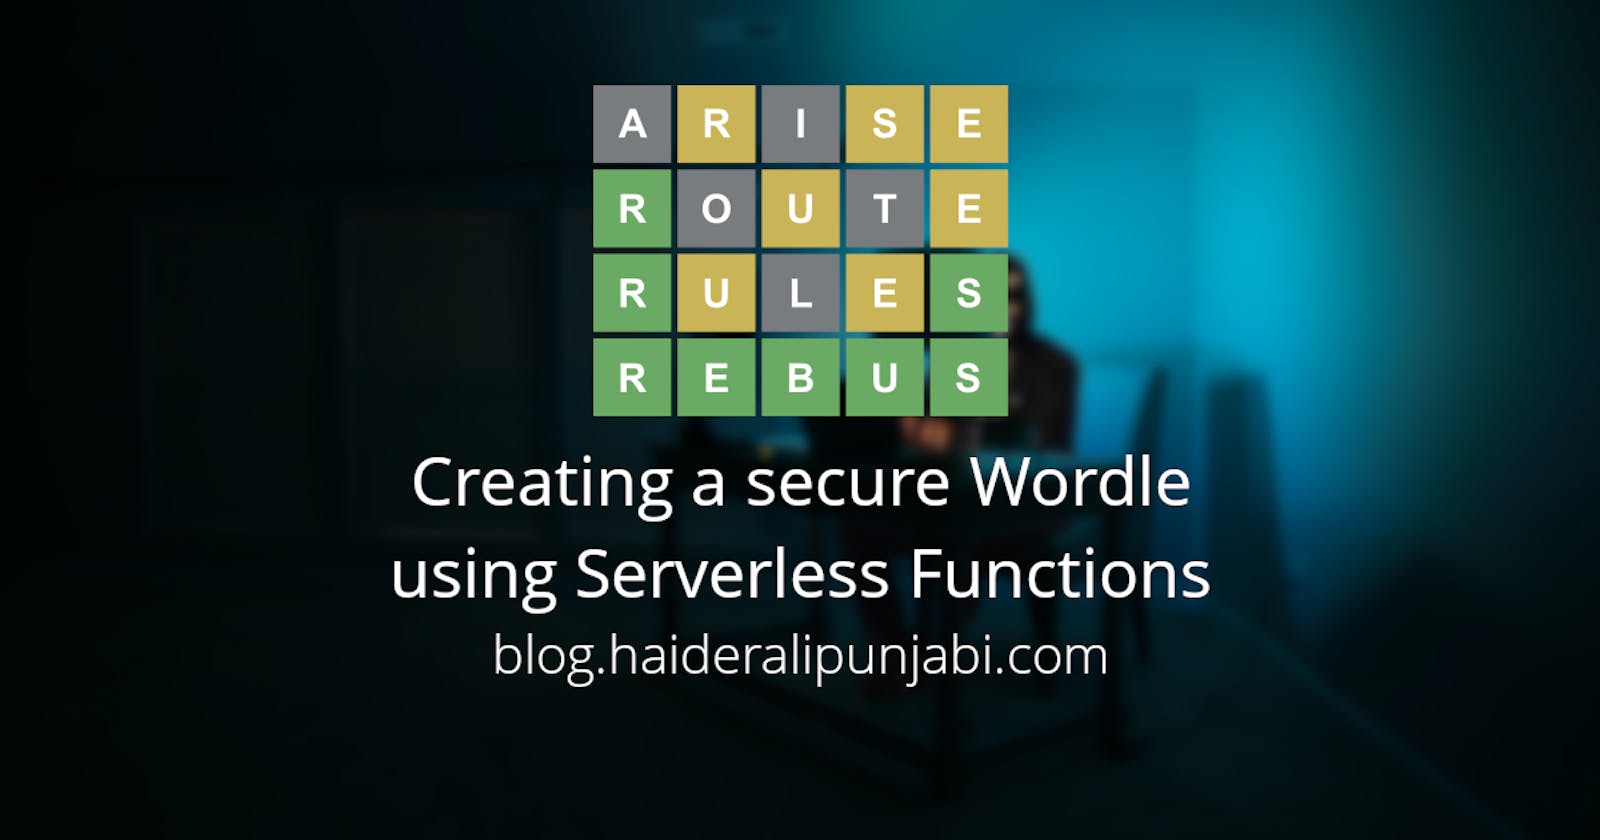 Creating a secure Wordle using Serverless Functions